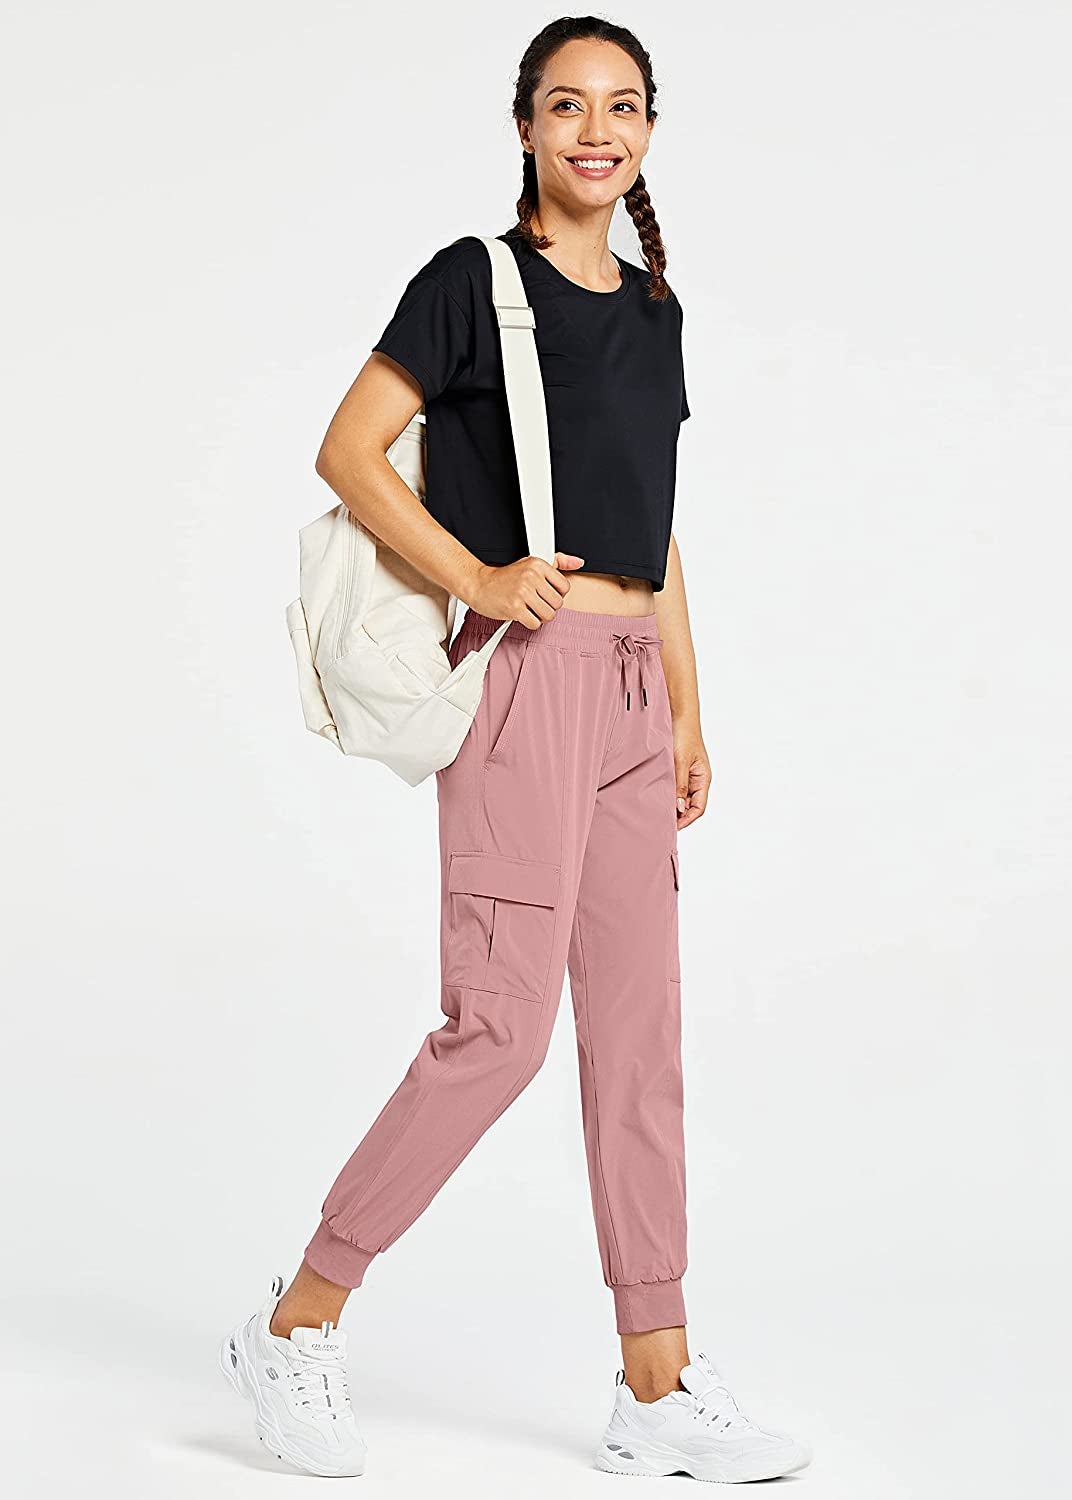 model wearing the pink joggers with a black tee and white sneakers